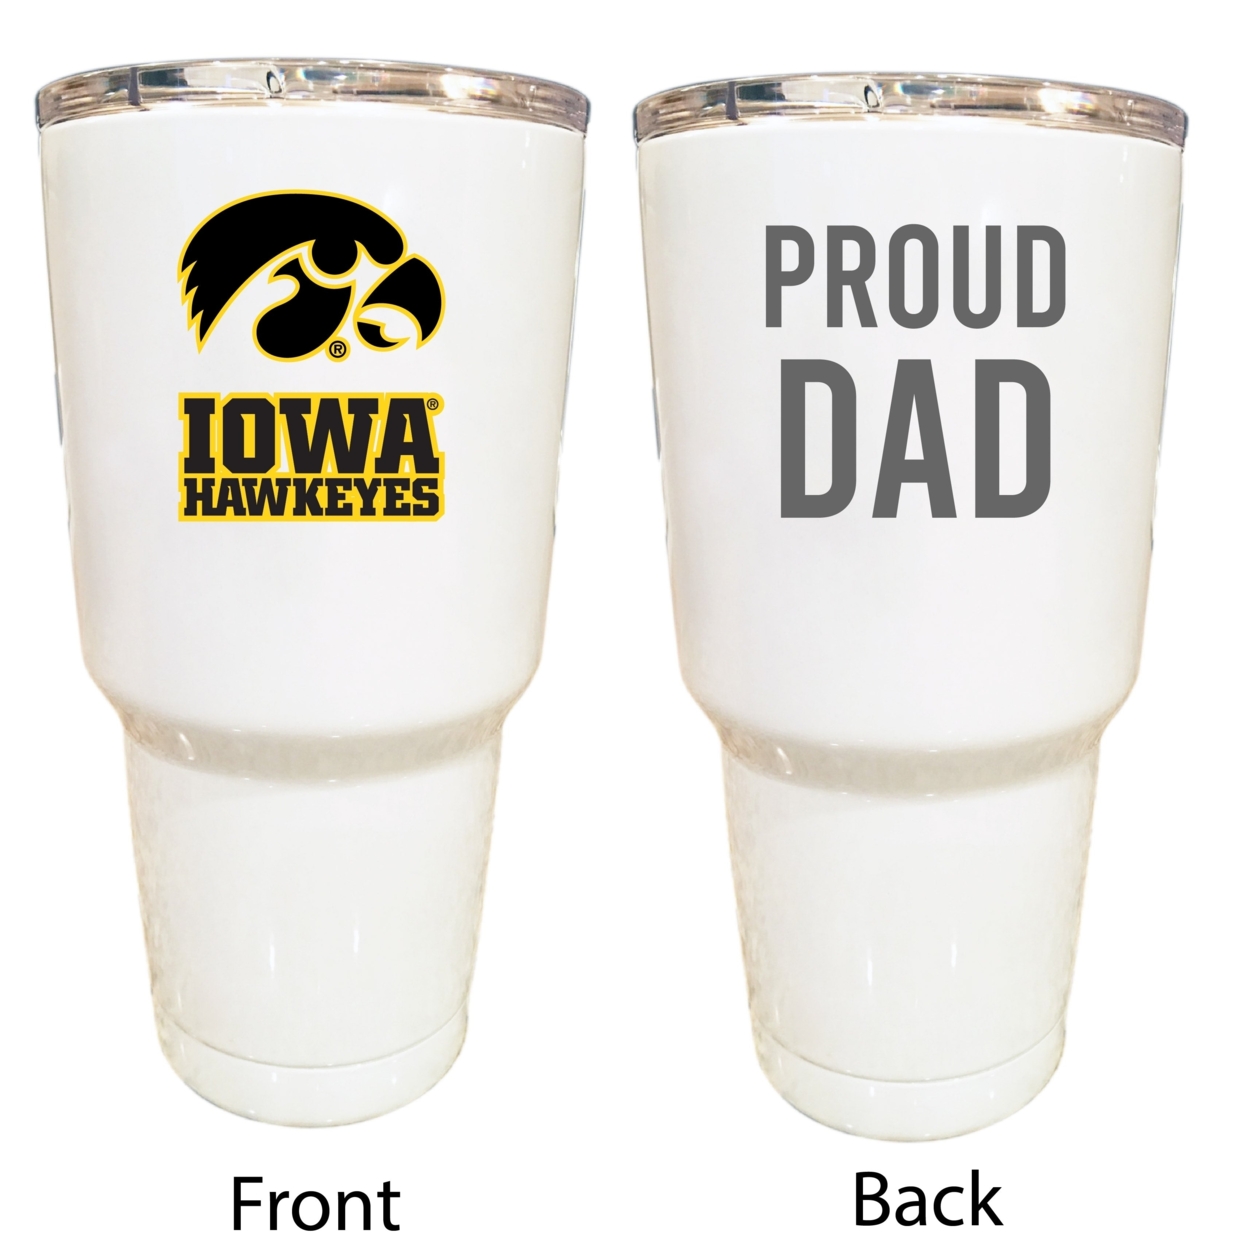 Iowa Hawkeyes Proud Dad 24 Oz Insulated Stainless Steel Tumblers Choose Your Color.